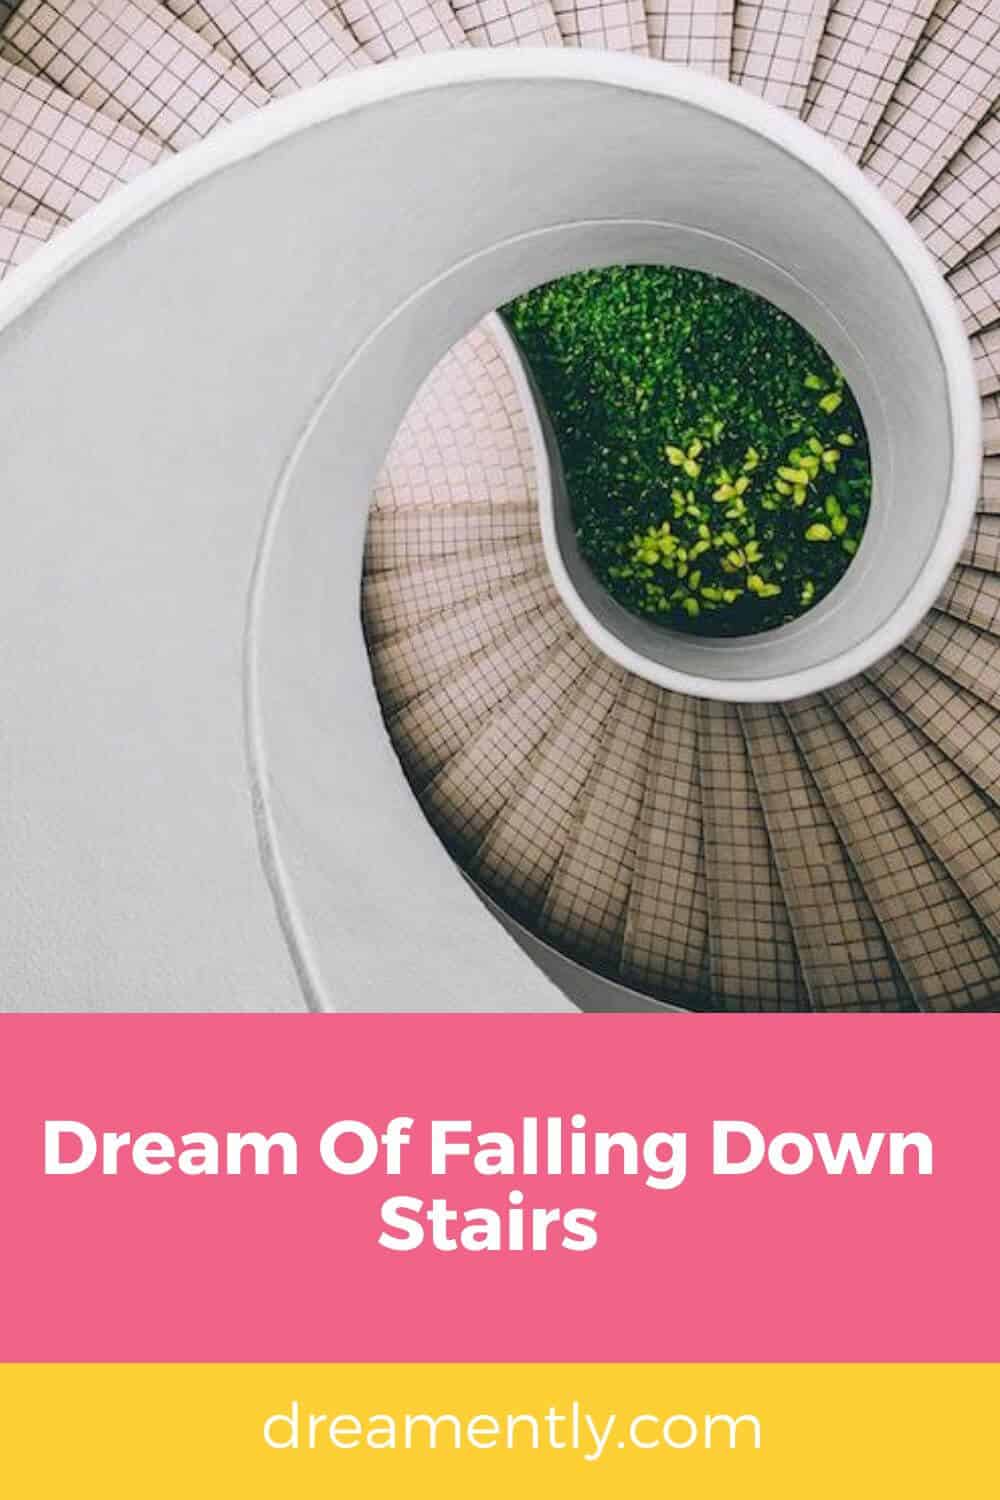 Dream Of Falling Down Stairs (2)